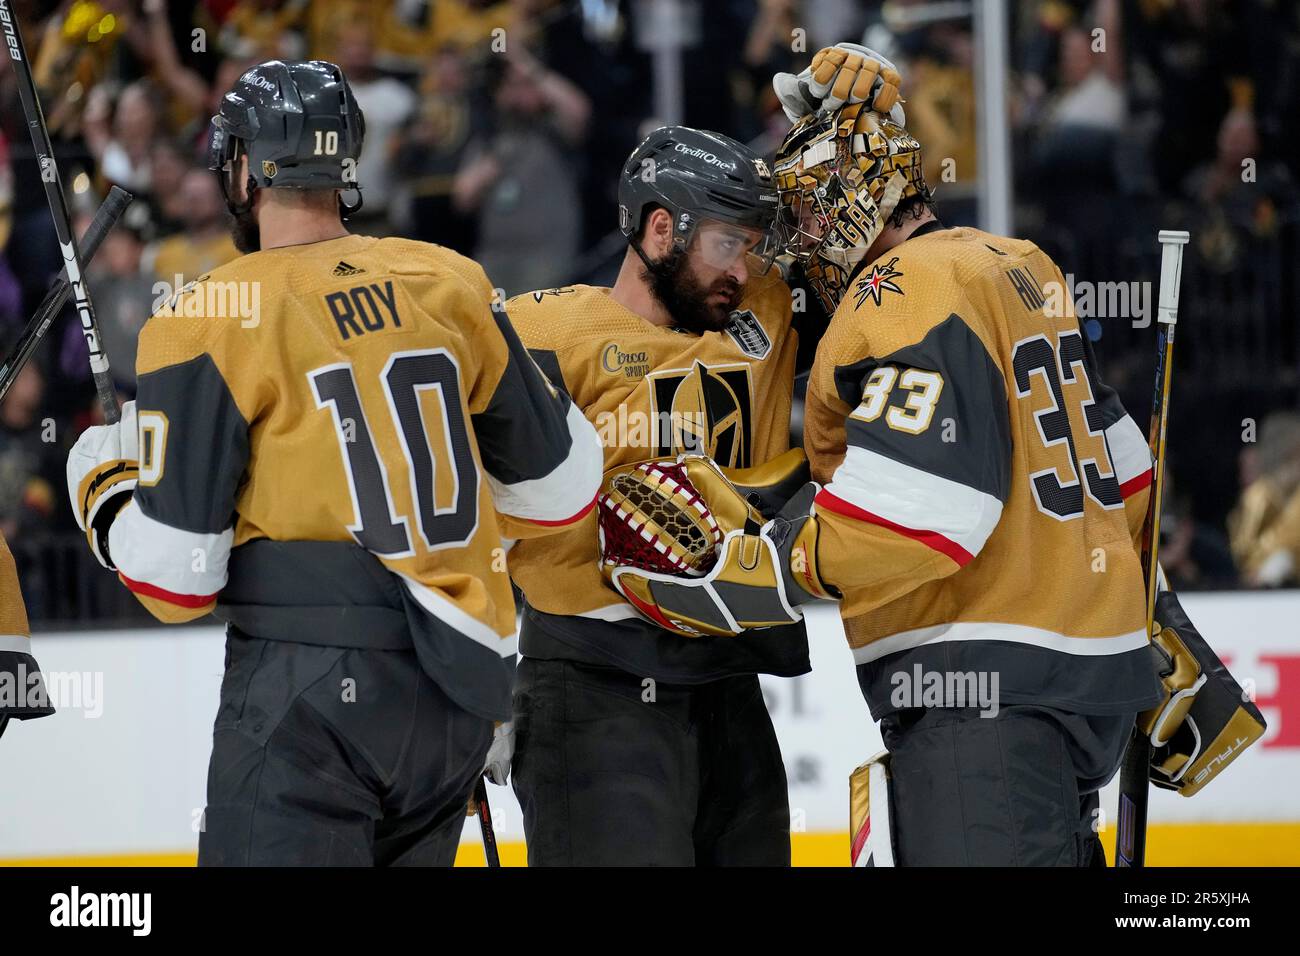 Vegas hits the jackpot, beats Florida to win Stanley Cup